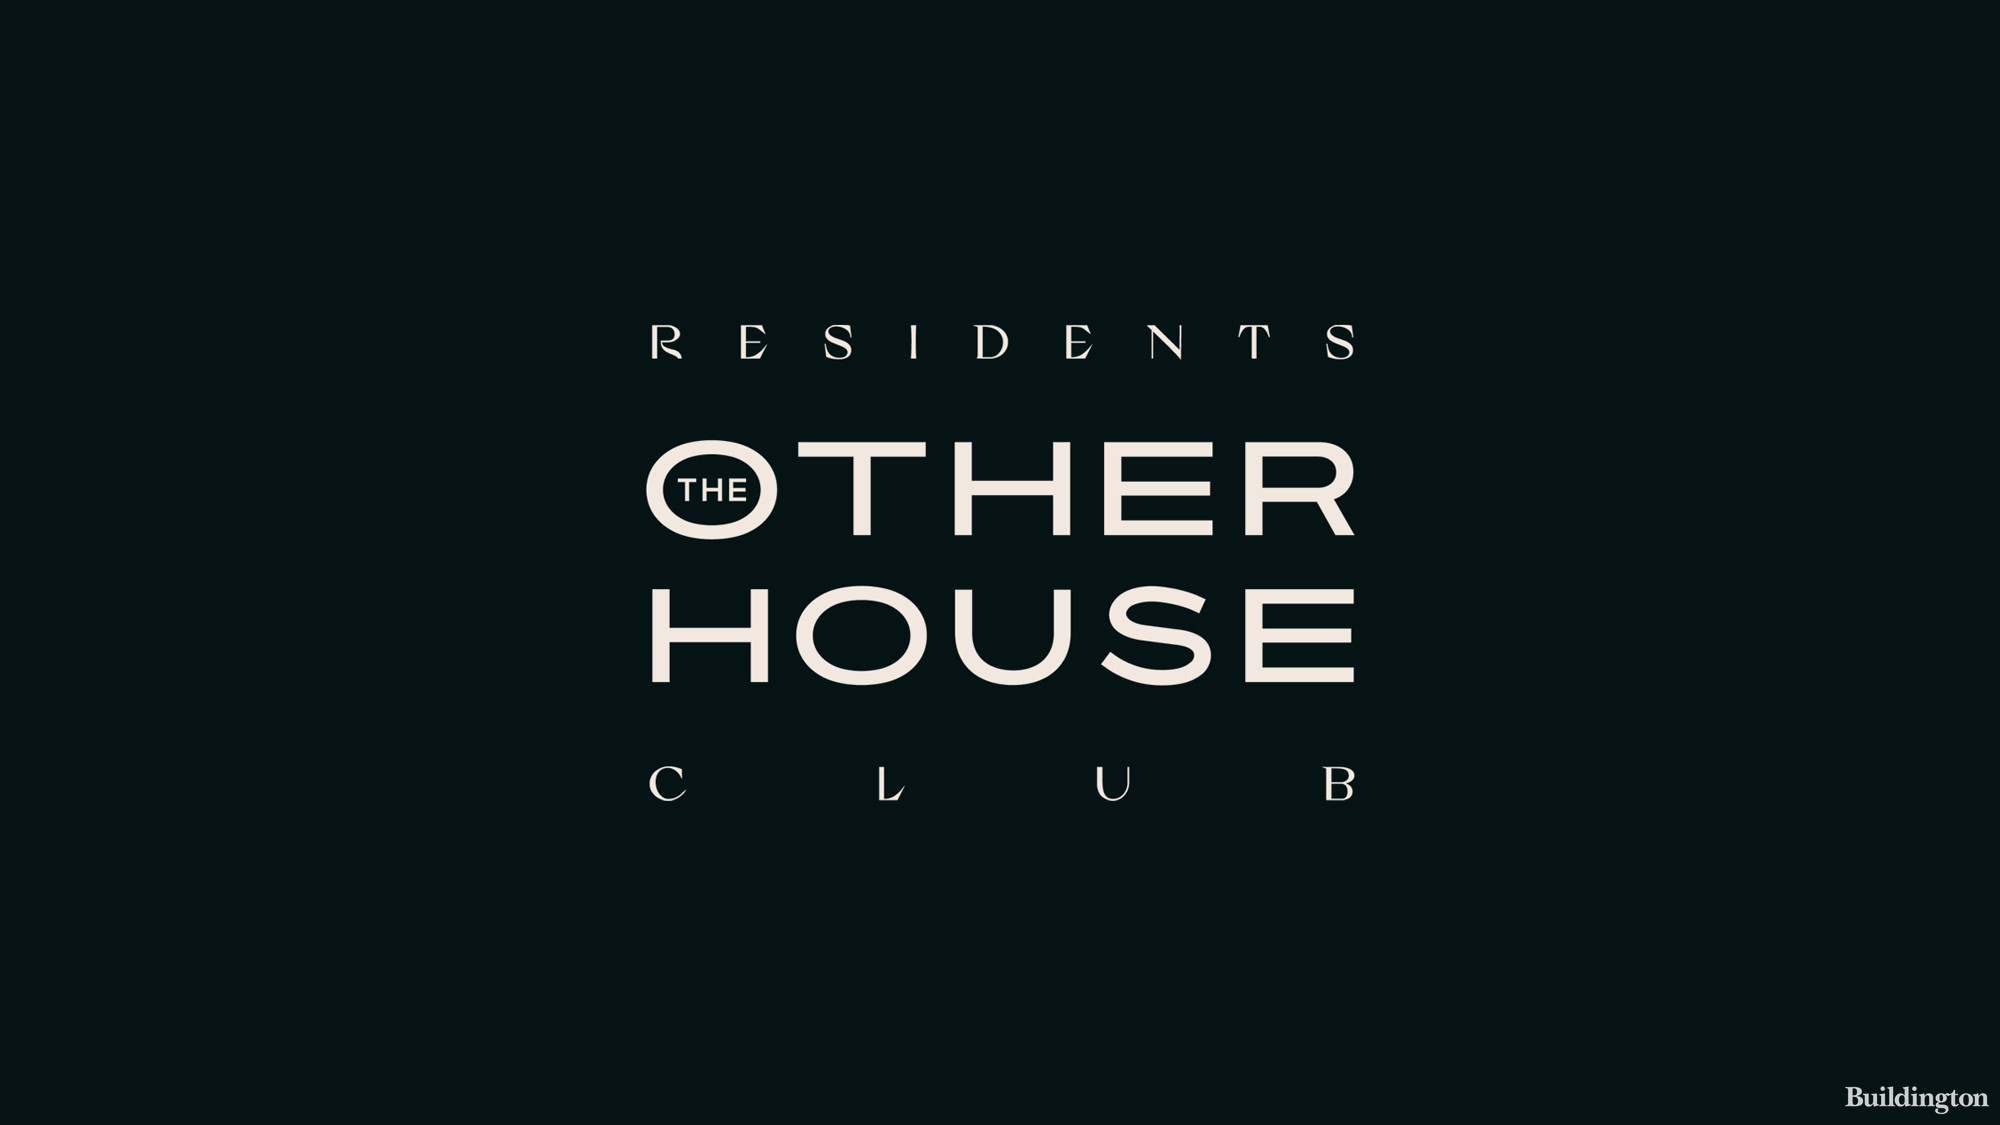 The Other House Residents Club logo.